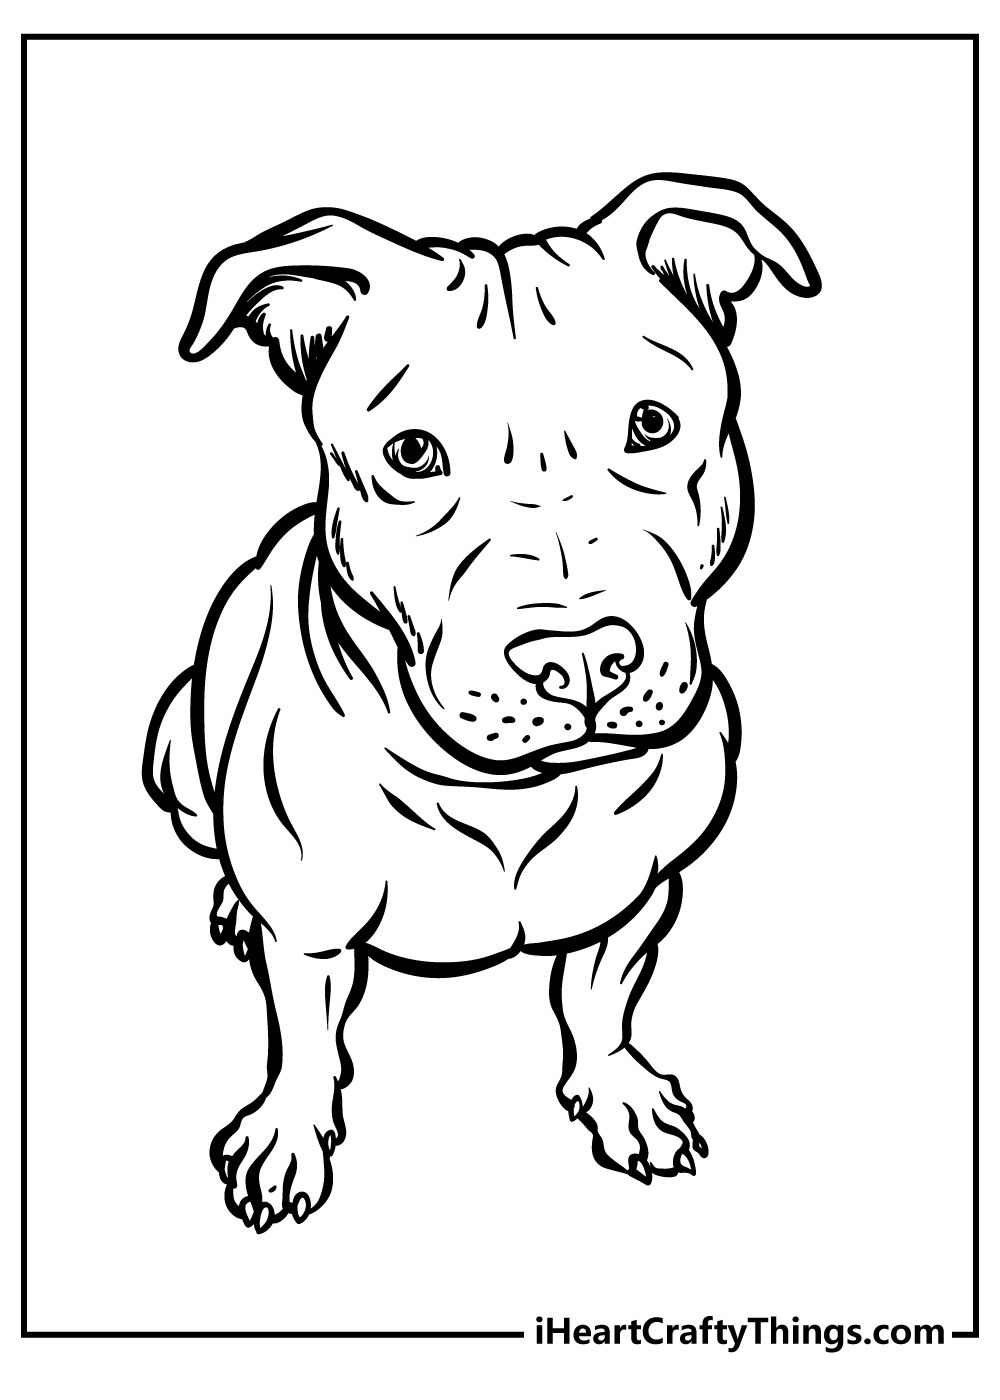 Pitbull Coloring Pages for kids free download